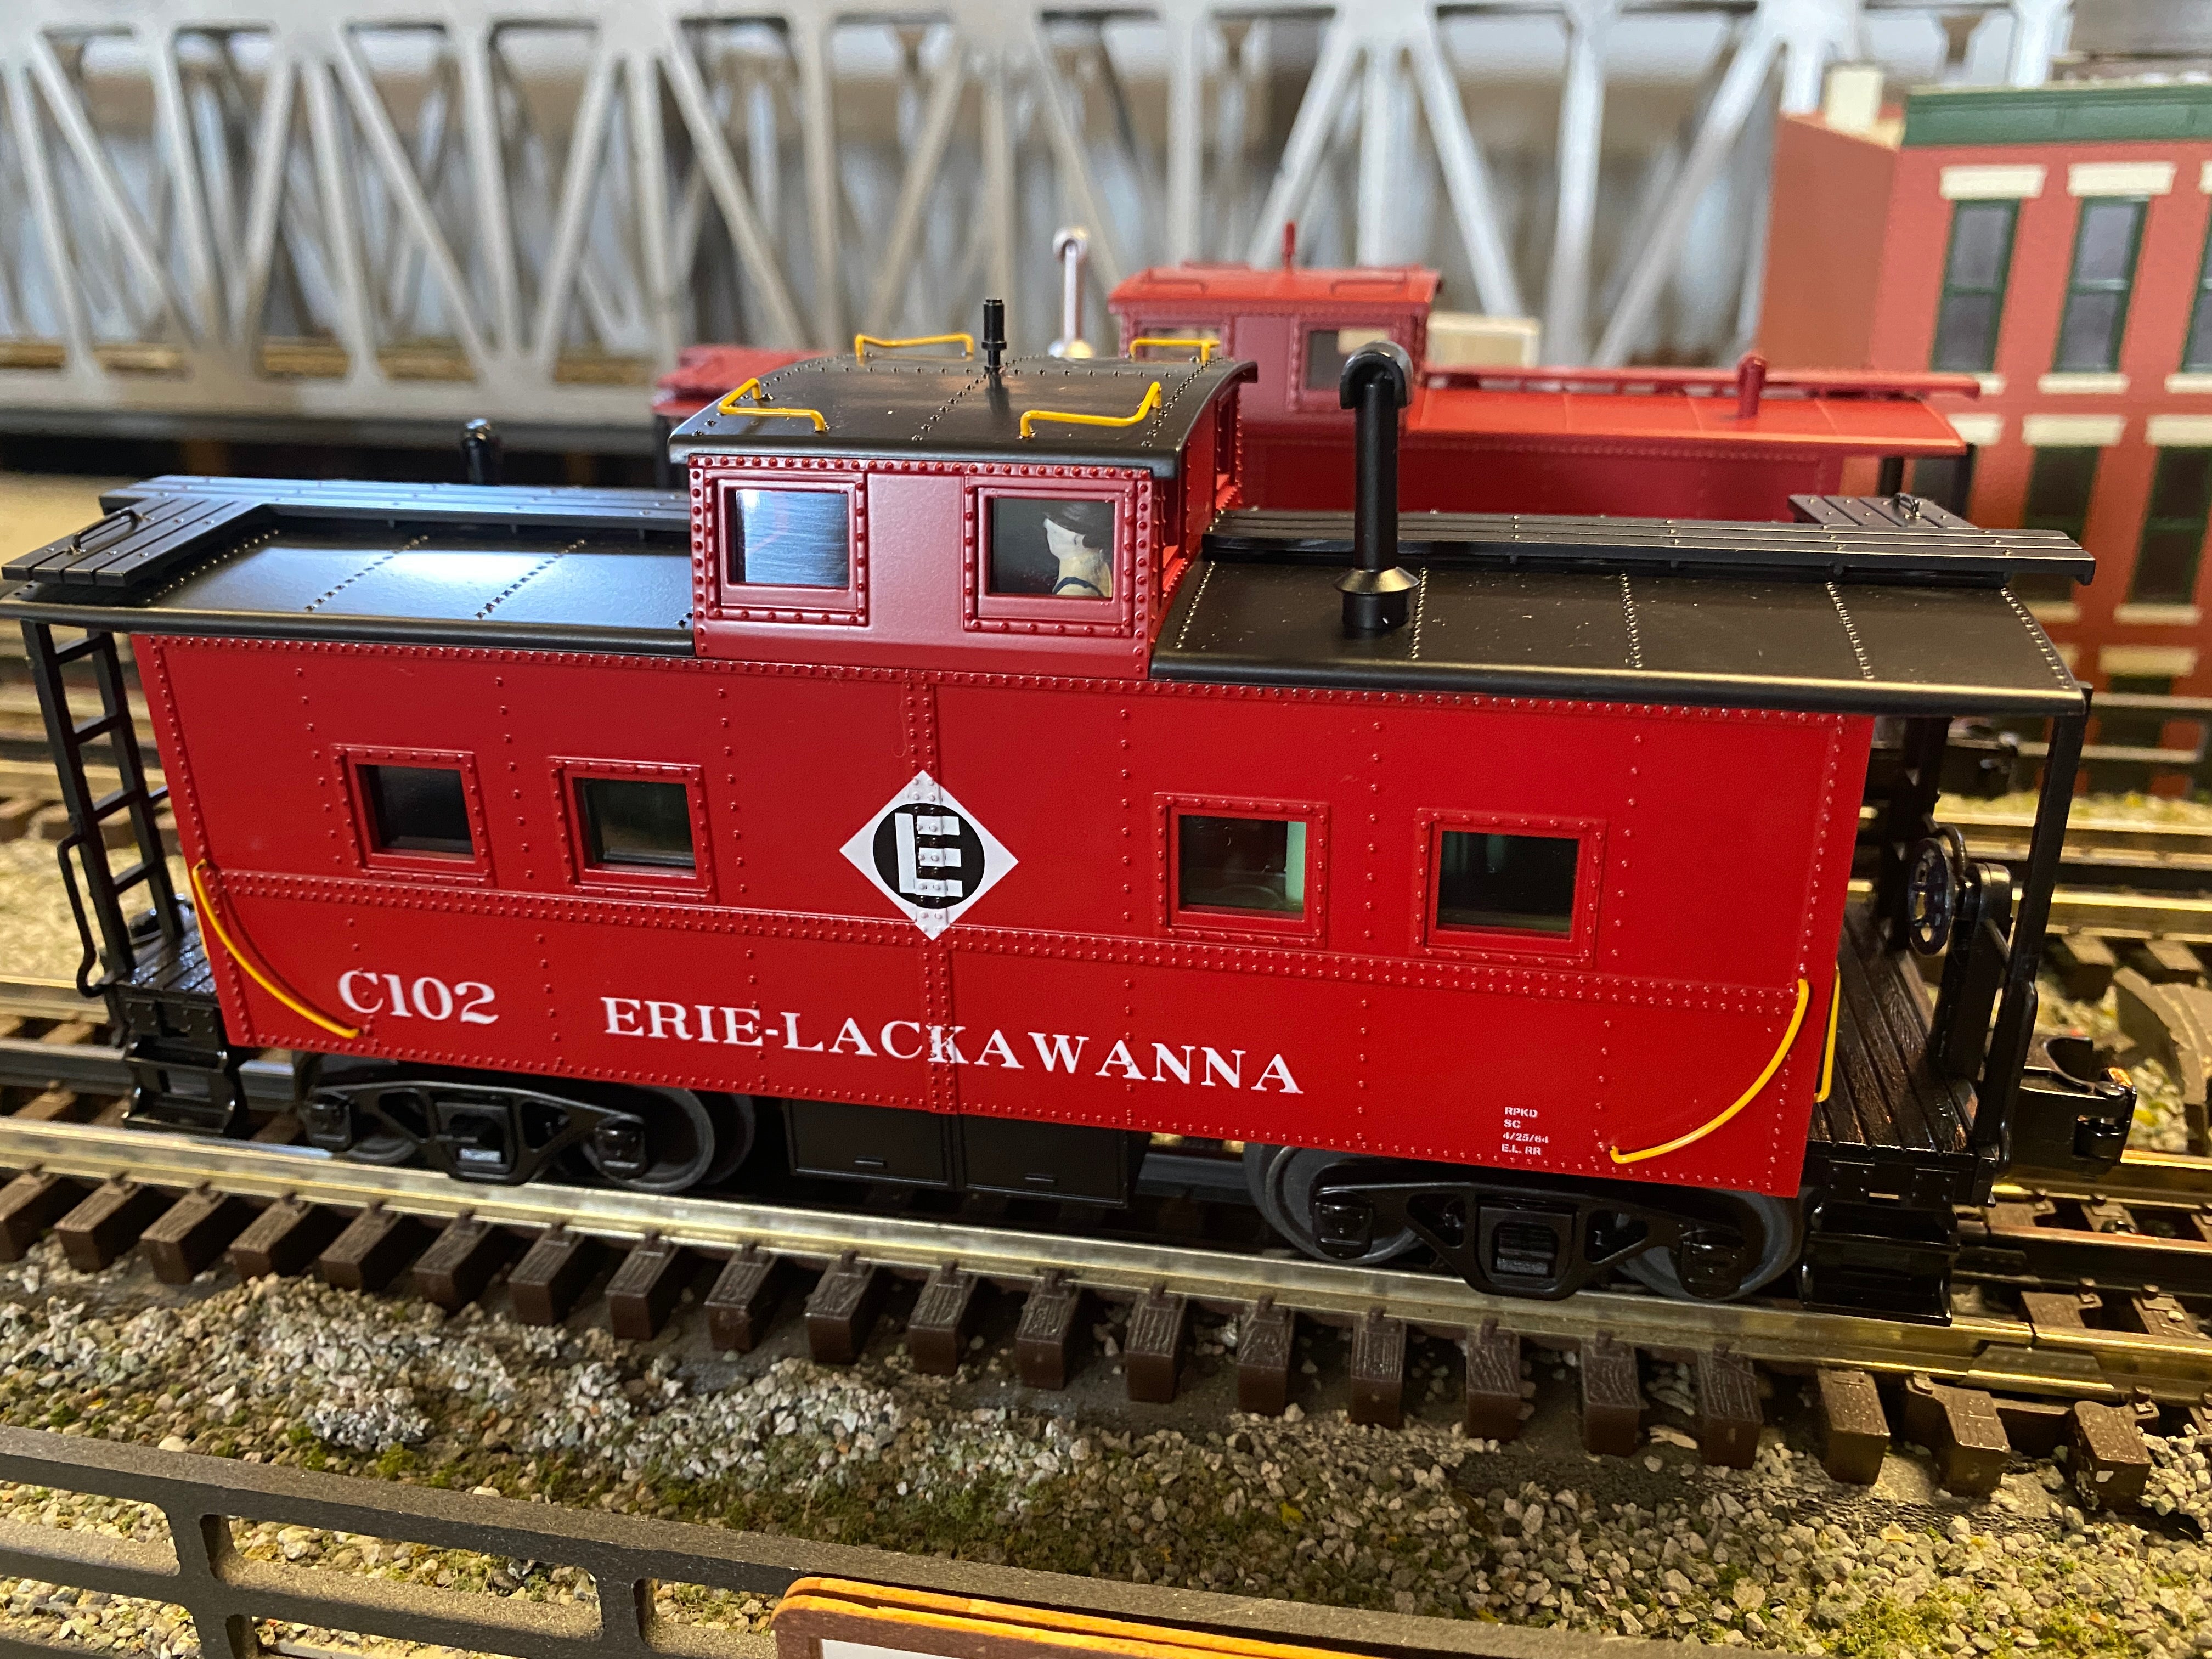 MTH 20-91743 - Steel Caboose (Center Cupola) "Erie Lackawanna" #C102 - Custom Run for Public Delivery Track & MrMuffin'sTrains